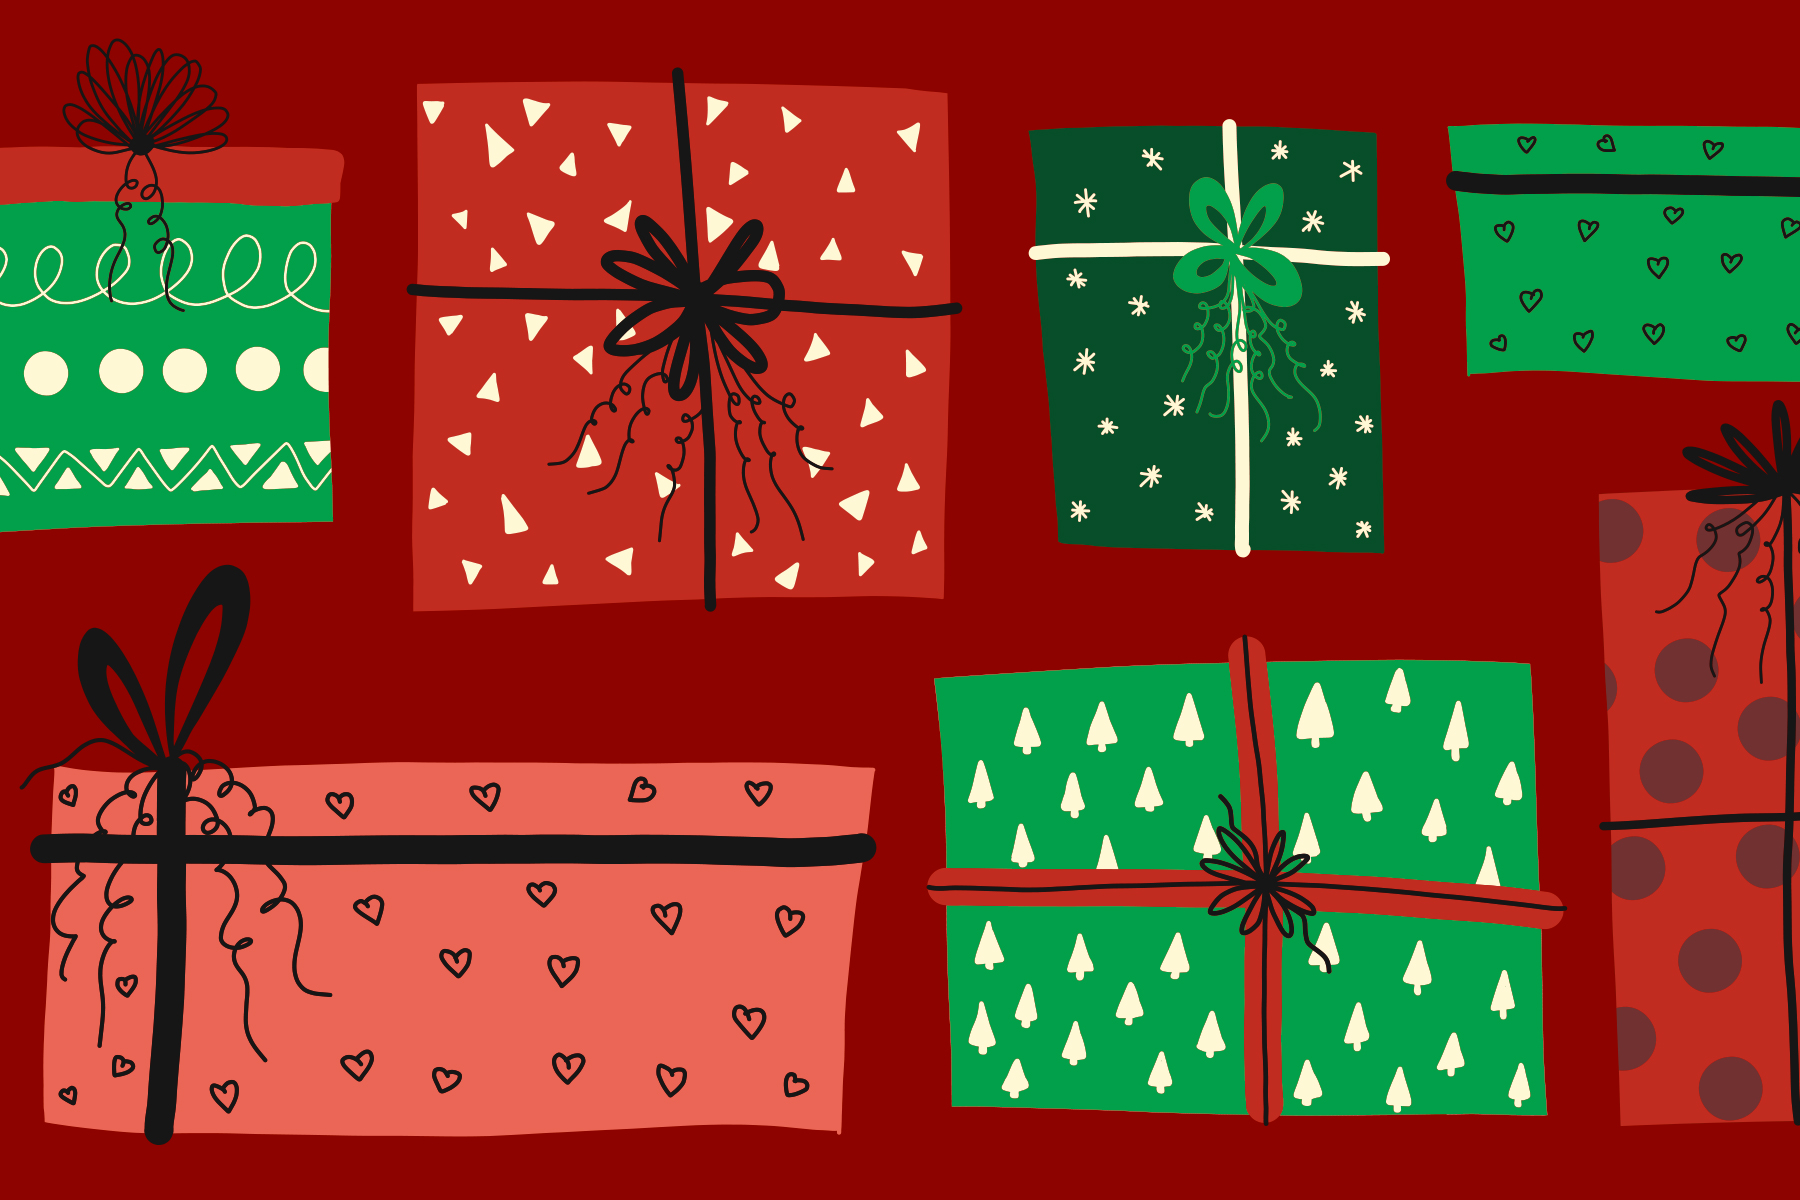 Pictures of presents on a red background